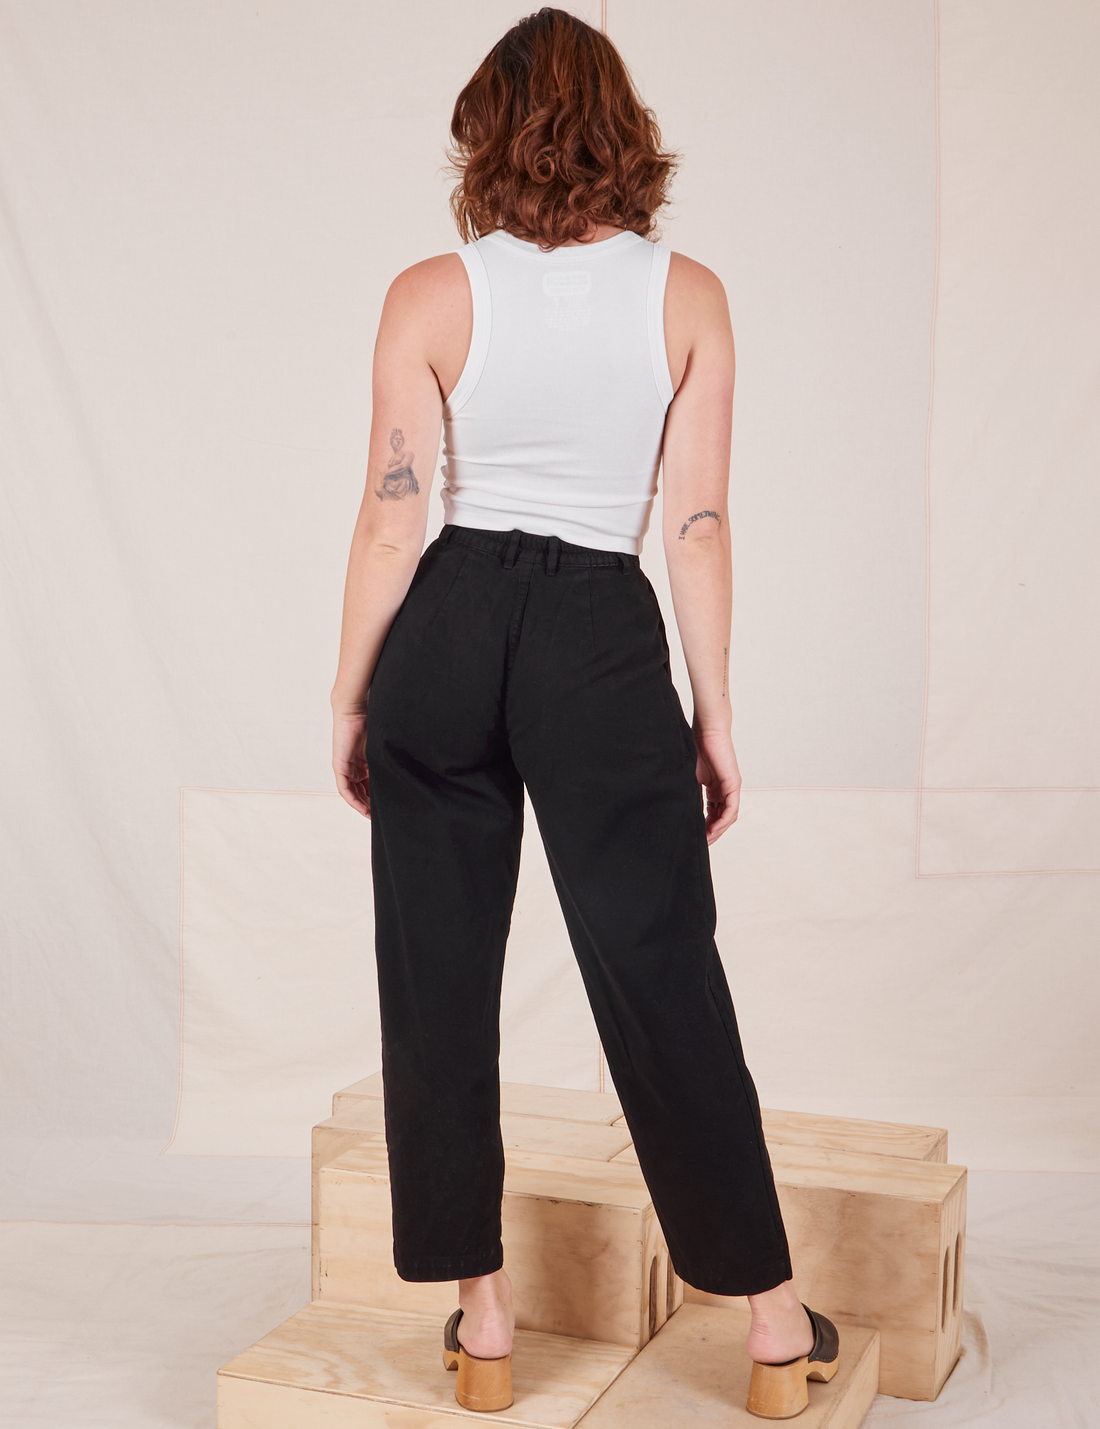 Back view of Heavyweight Trousers in Basic Black and vintage off-white Cropped Tank Top worn by Alex.